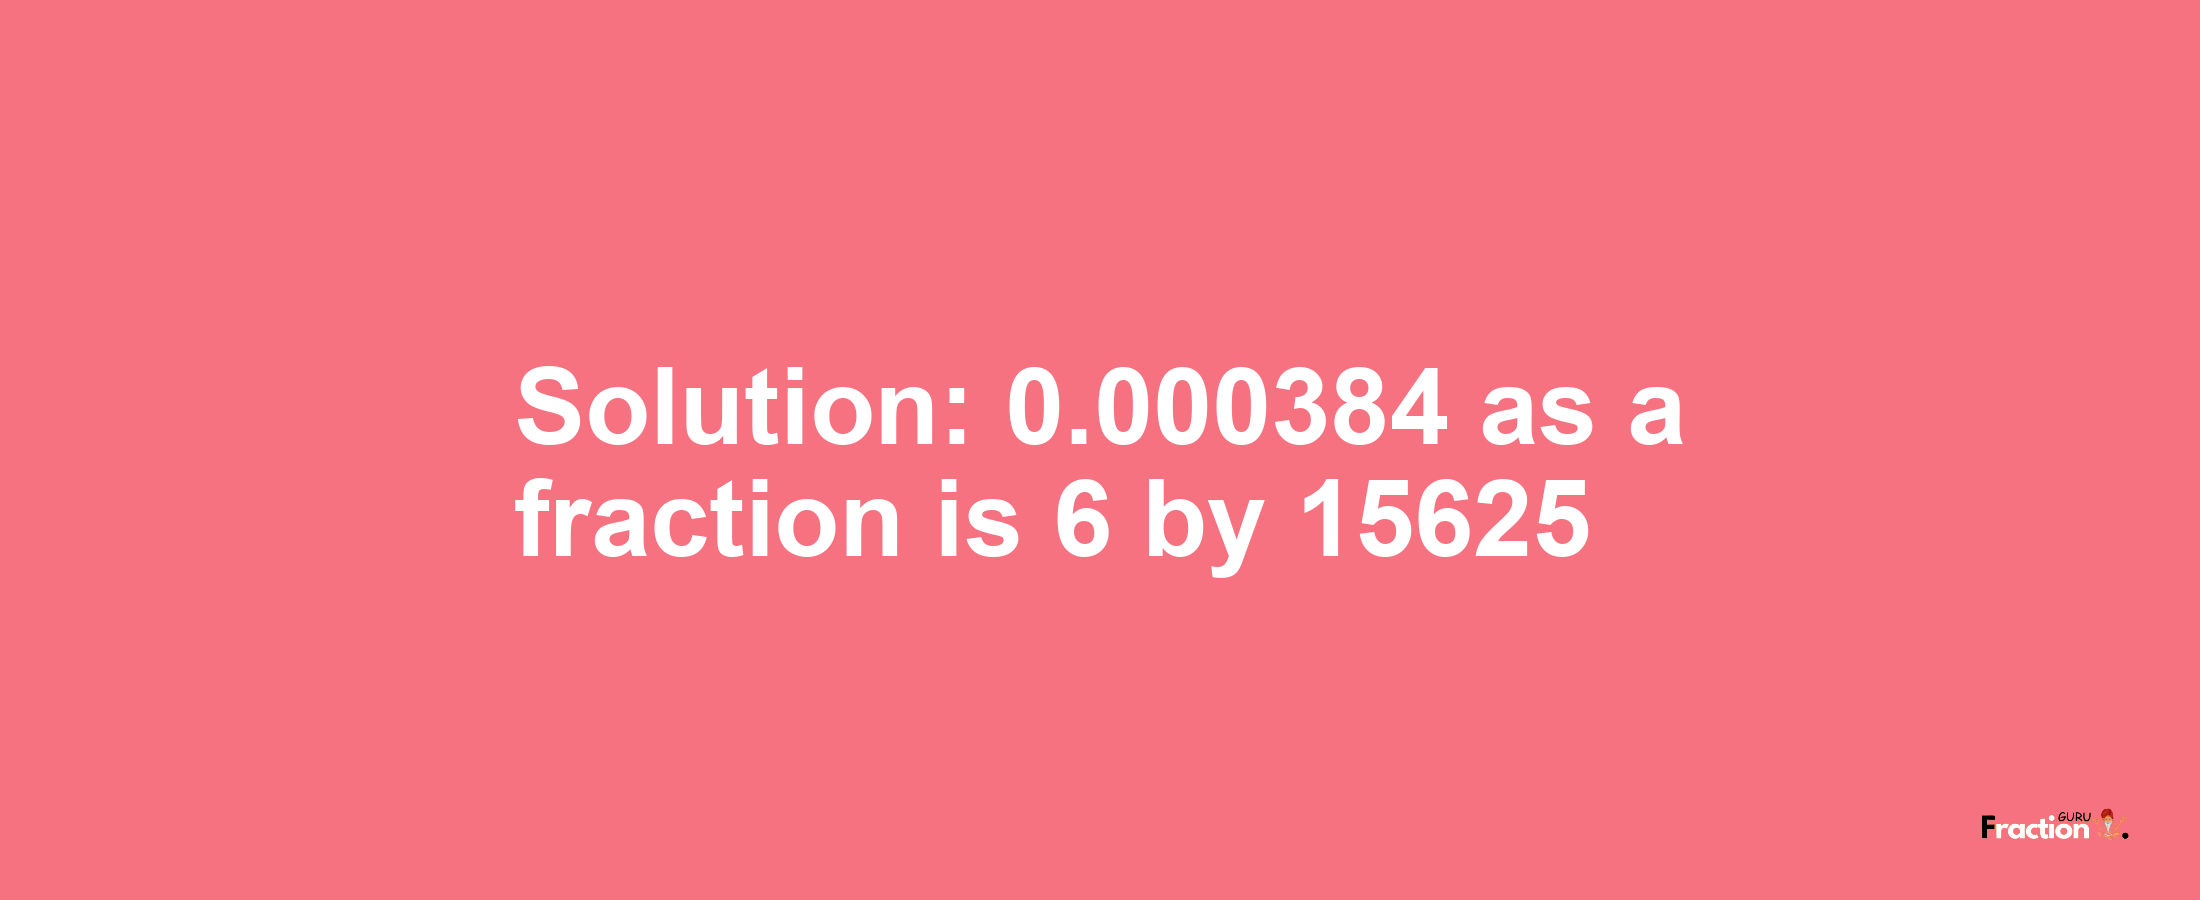 Solution:0.000384 as a fraction is 6/15625